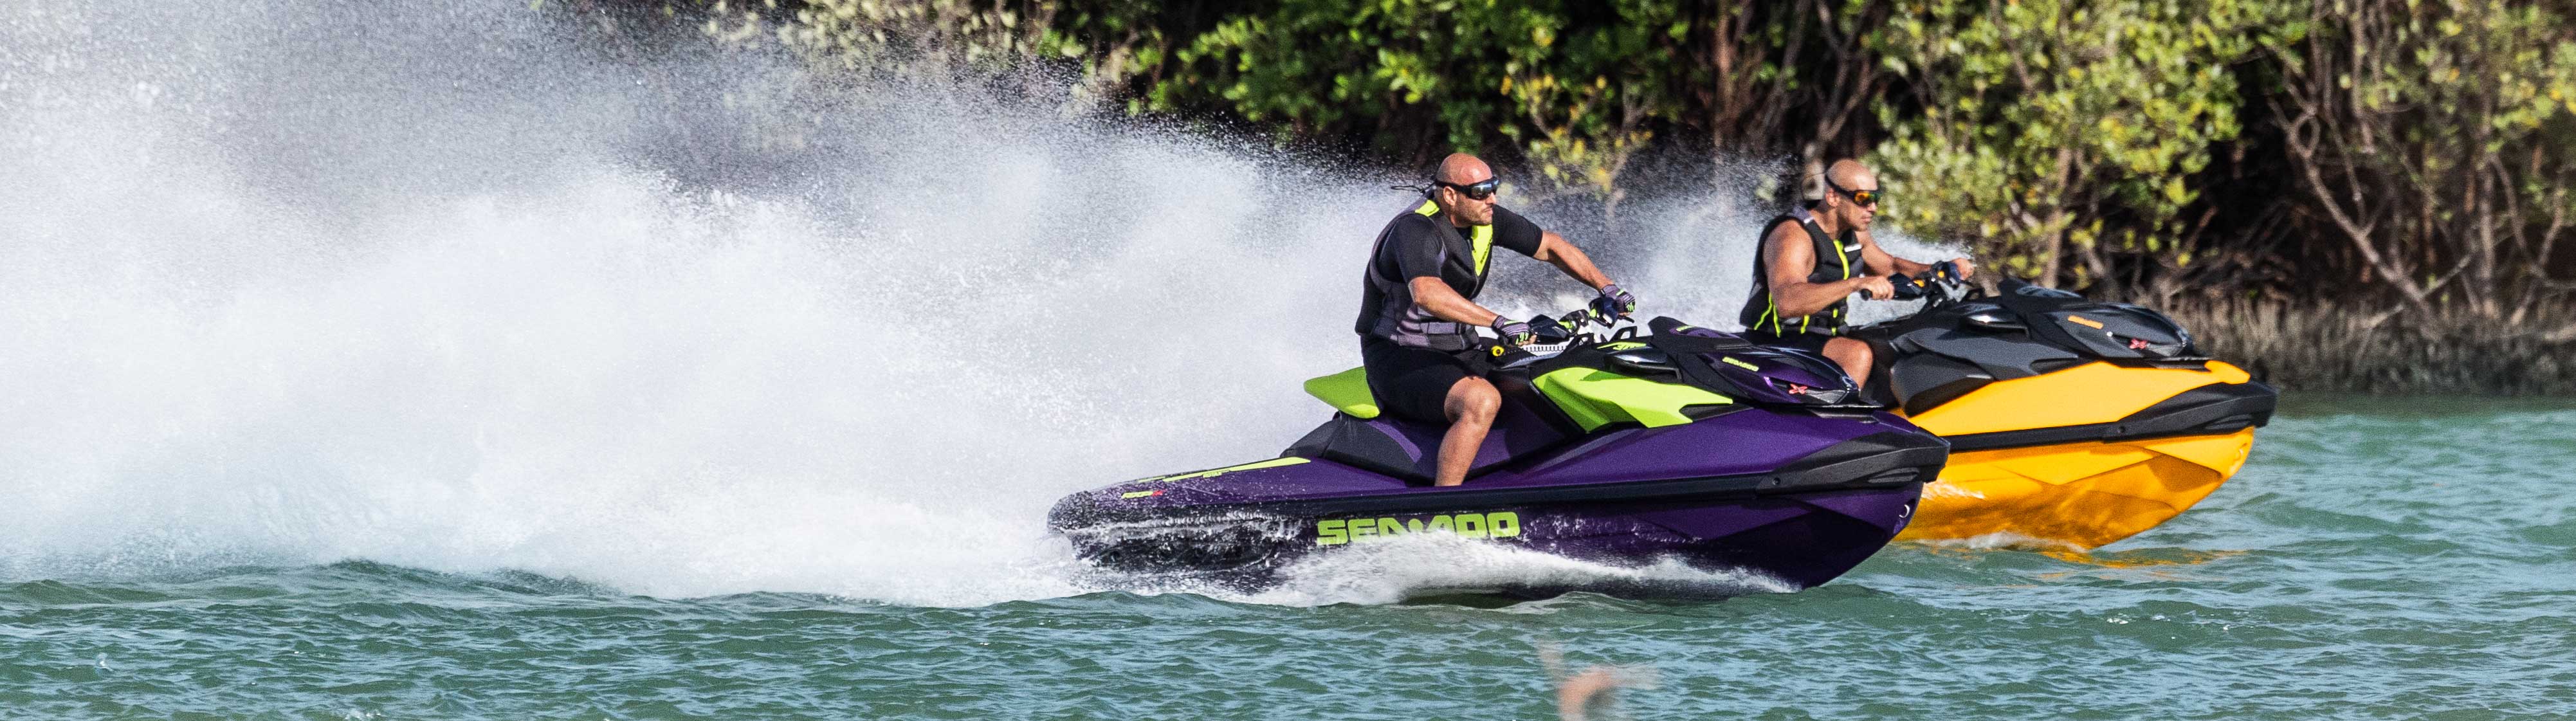 2 mens racing with their Sea-Doo RXP-X